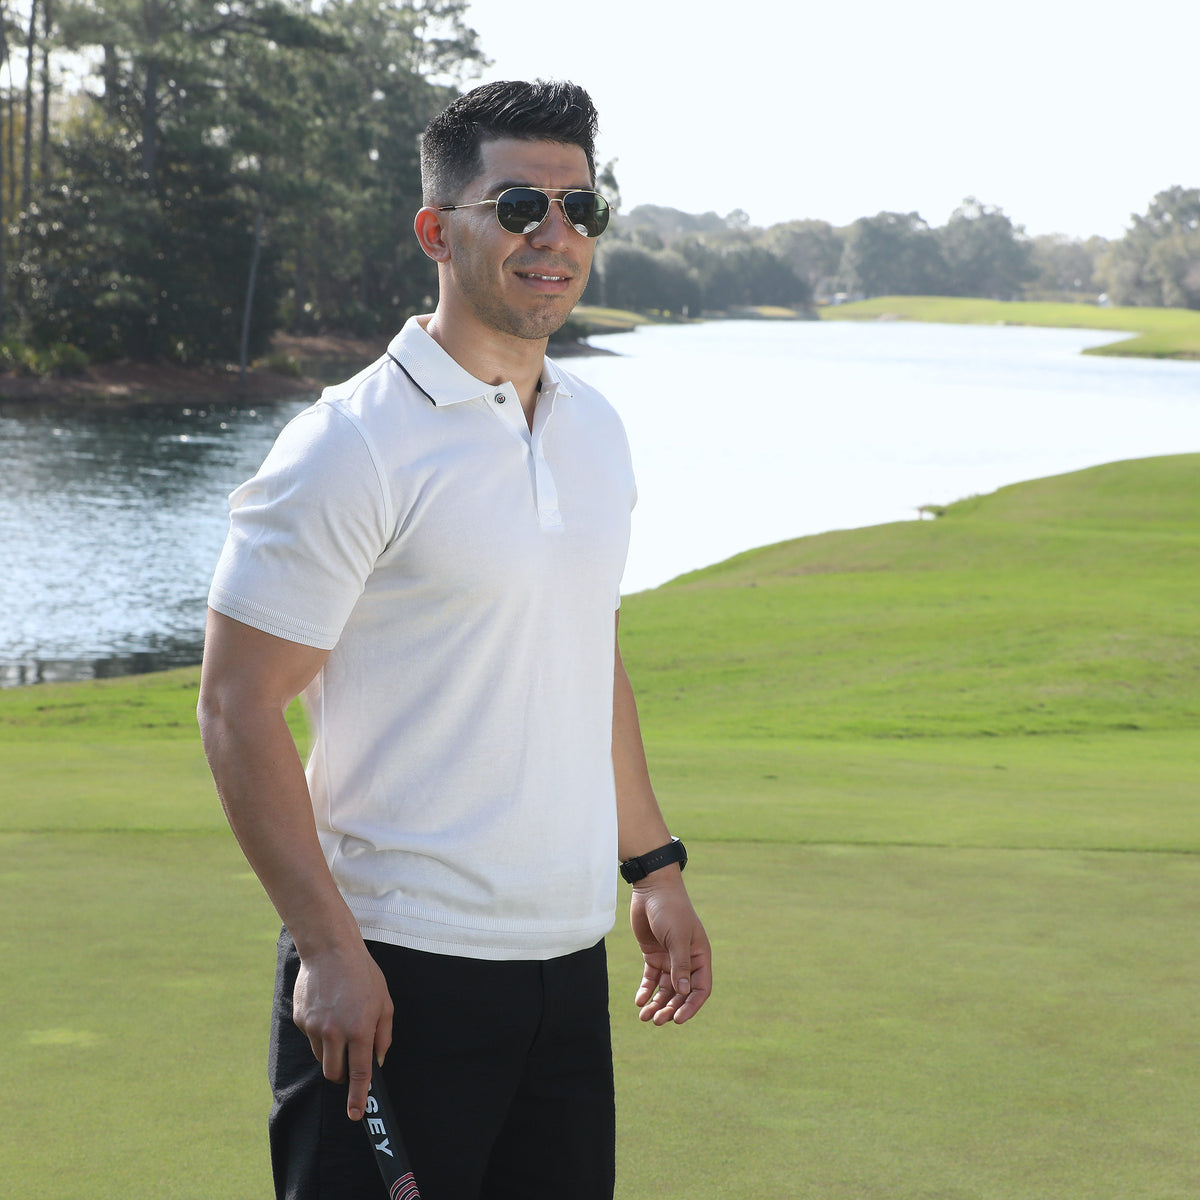 Our Sorrento White Fine Ribbed Light Weight Polo is your ticket to looking smart and feeling comfy on the course, pool, or beach. Whether you’re looking to make a statement on the links or just chill out in style, this white polo is perfect for any occasion. Lightweight and finely ribbed, this polo is sure to keep you feeling fine and free!